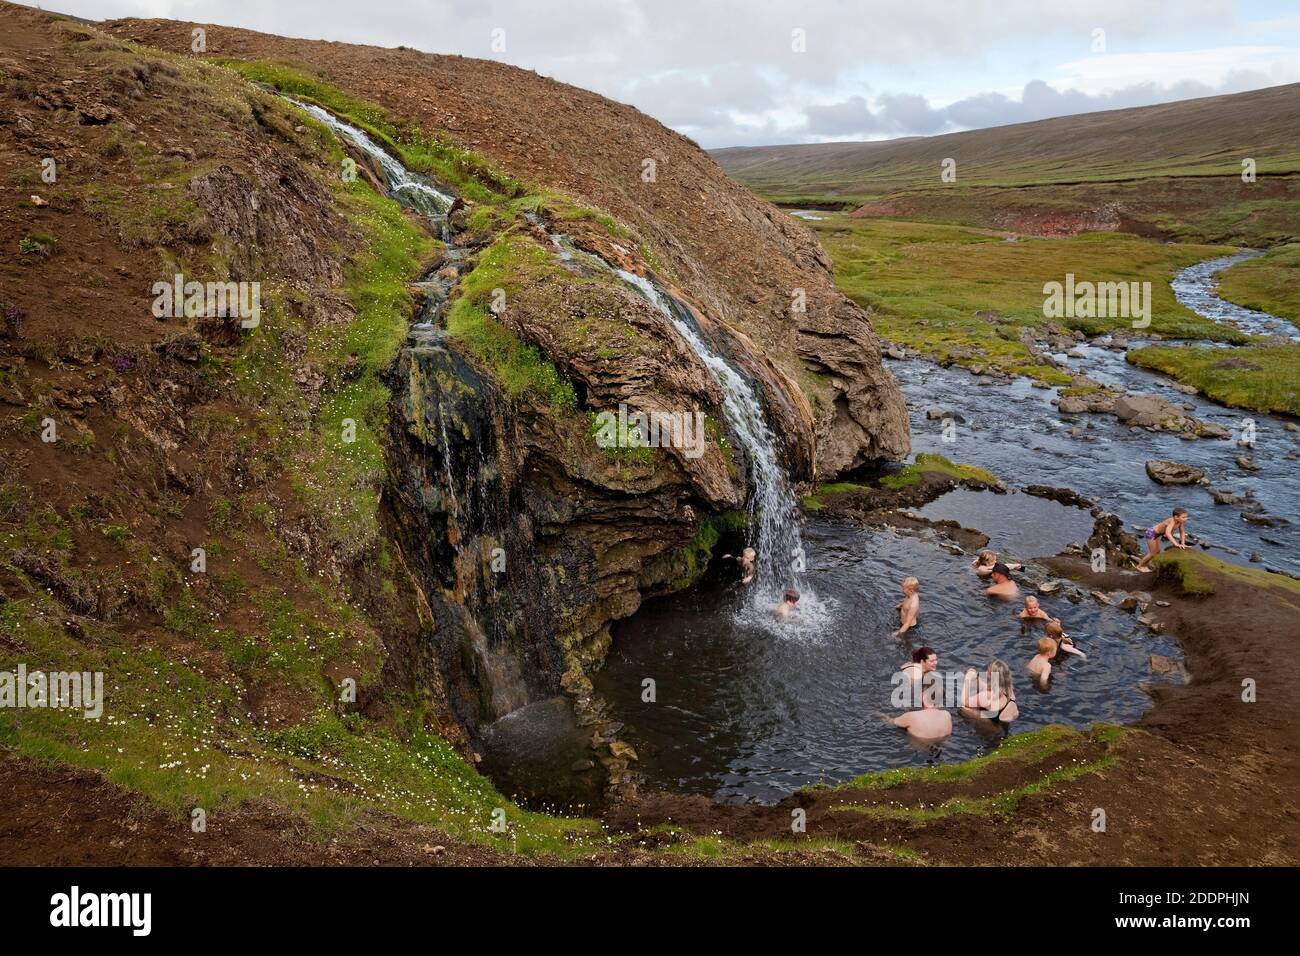 bathing people in nature pool under a warm waterfall on the mountian Laugarfell, Iceland, Laugarvallardalur Stock Photo